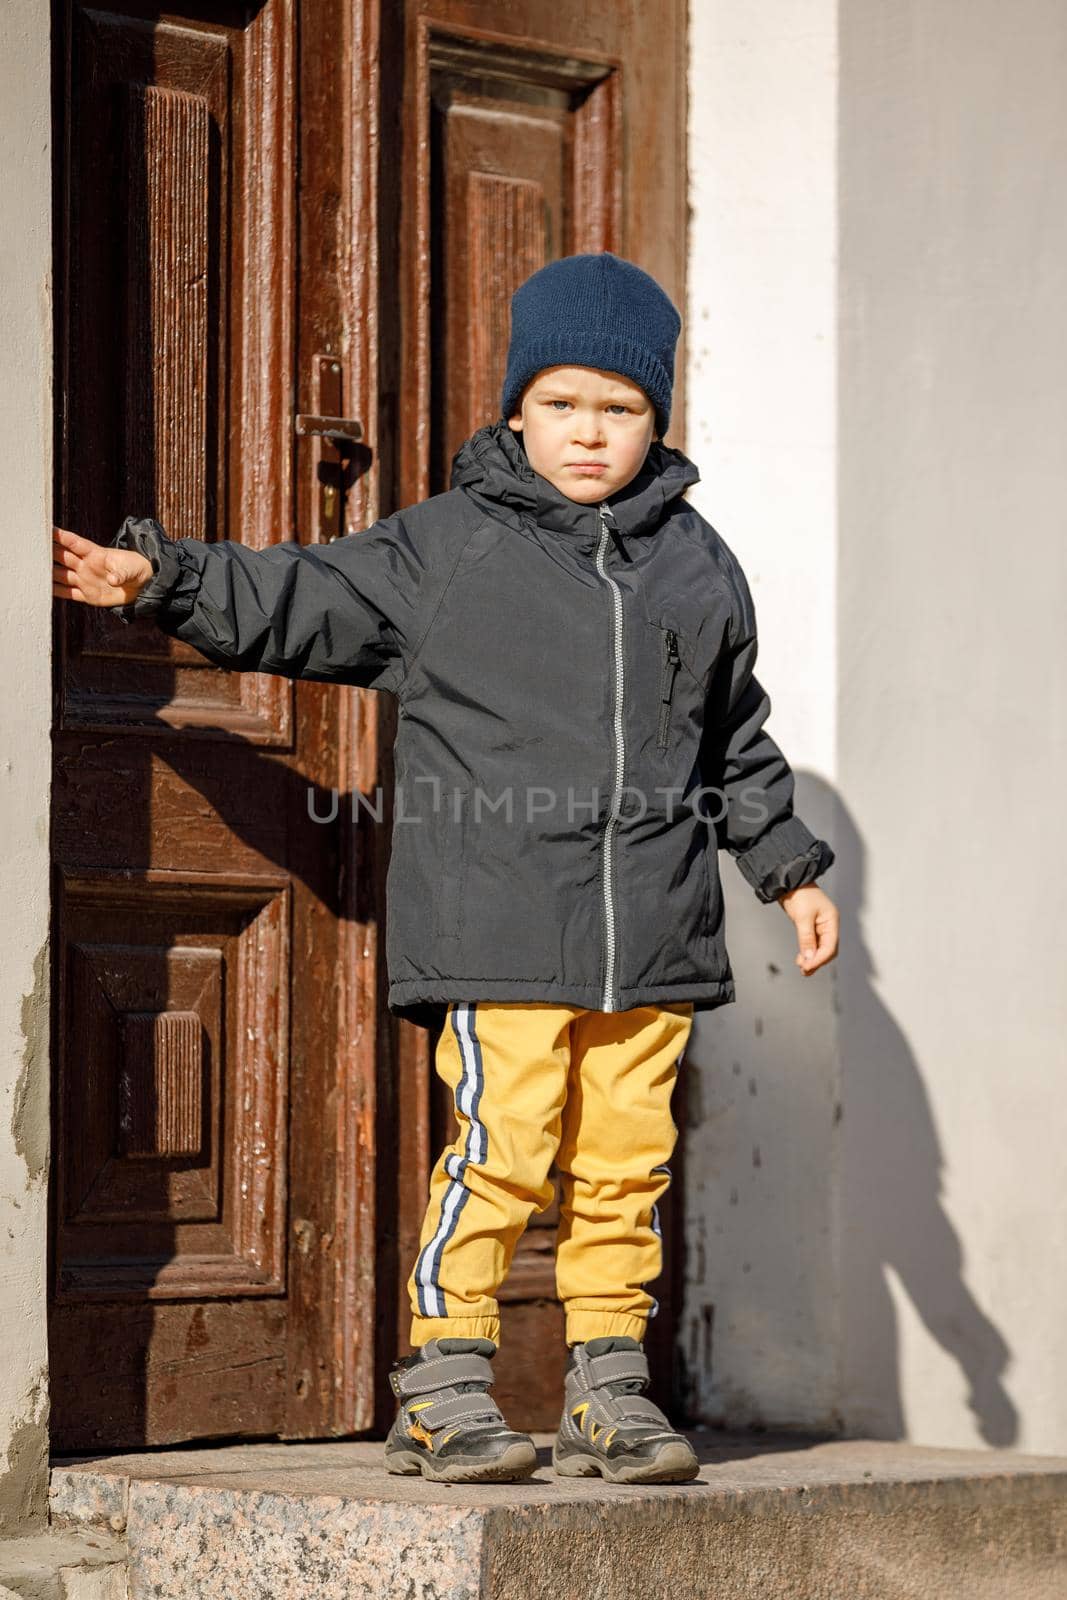 A little boy poses for a photographer on an autumn day at the ancient door in the center of Klaipeda's Old Town by Lincikas